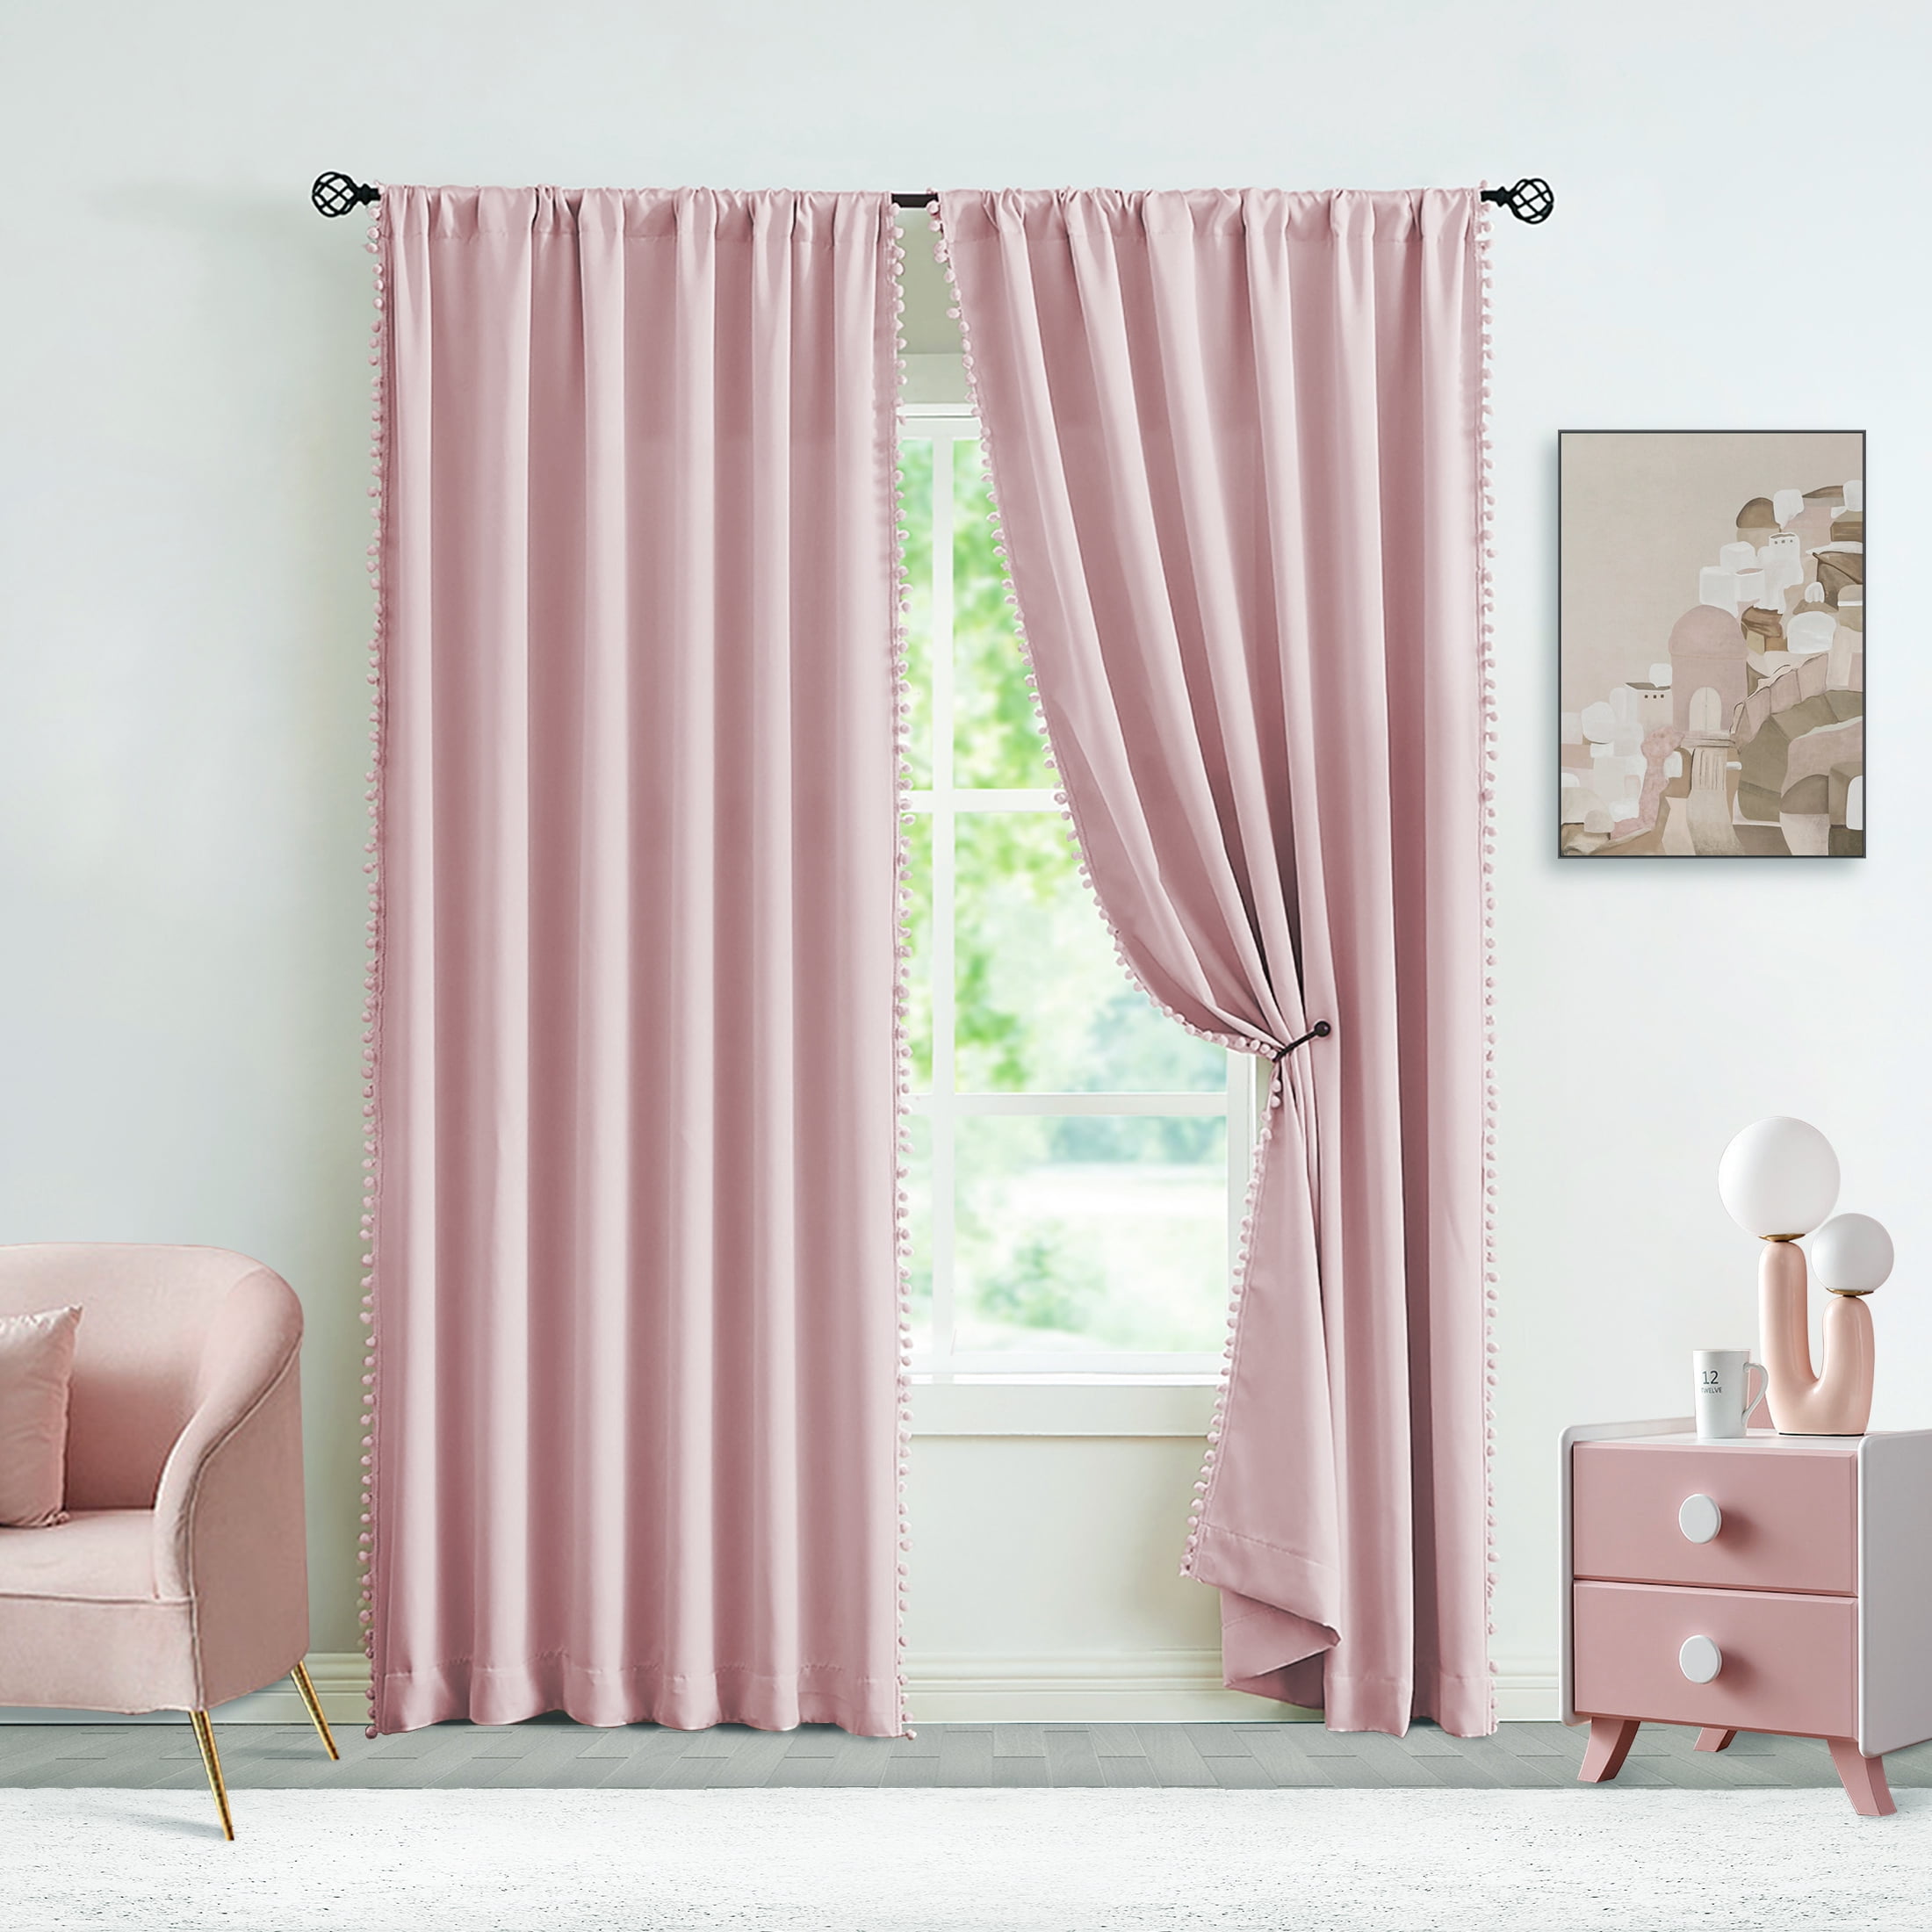 Exultantex Thermal Insulated Blackout Curtains For Bedroom Pink Pom Window Ds Energy Efficient Panels 50 W X 63 L 2pcs Com